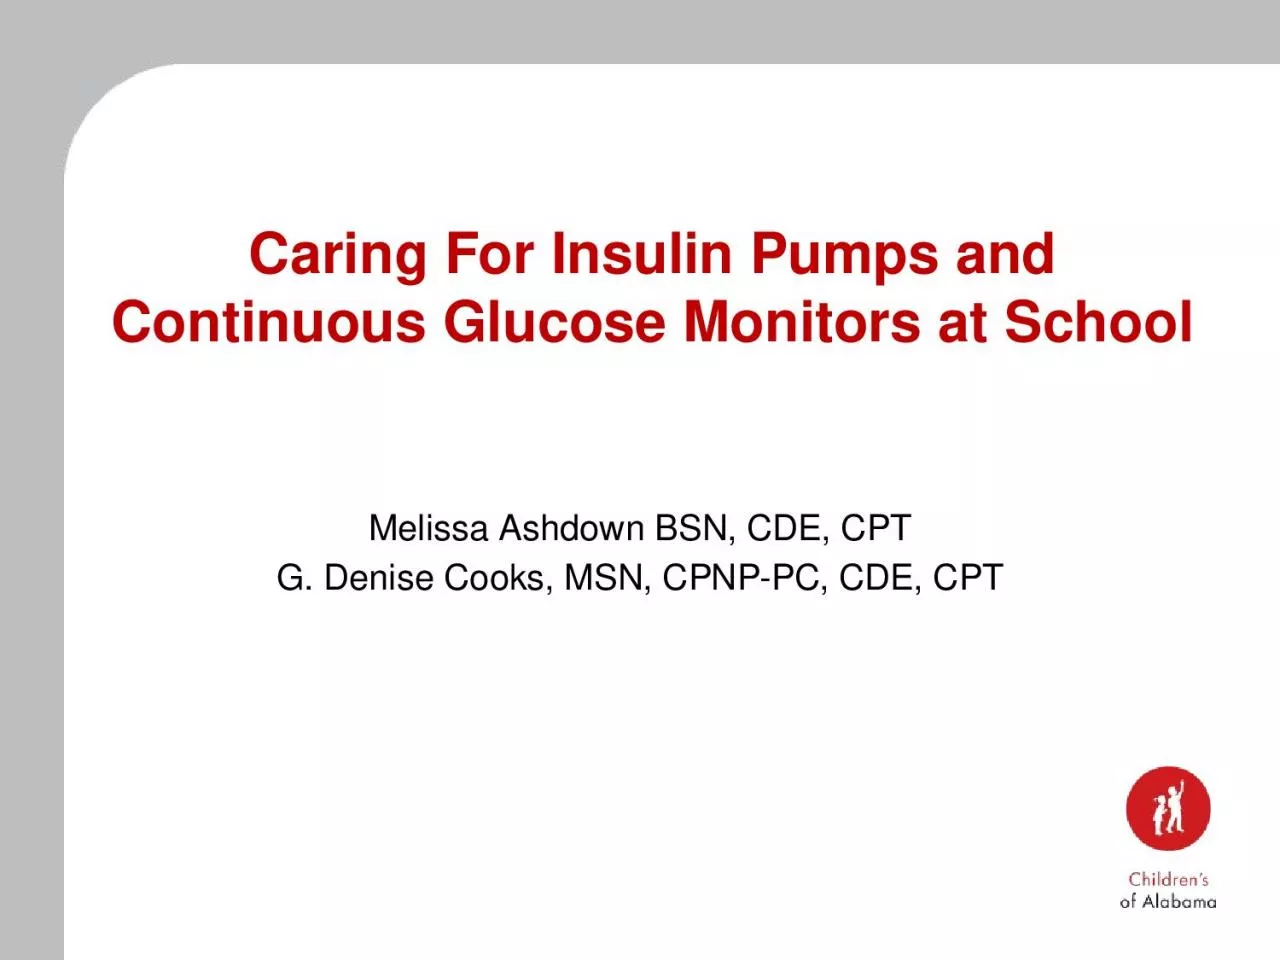 Caring For Insulin Pumps and Continuous Glucose Monitors at School